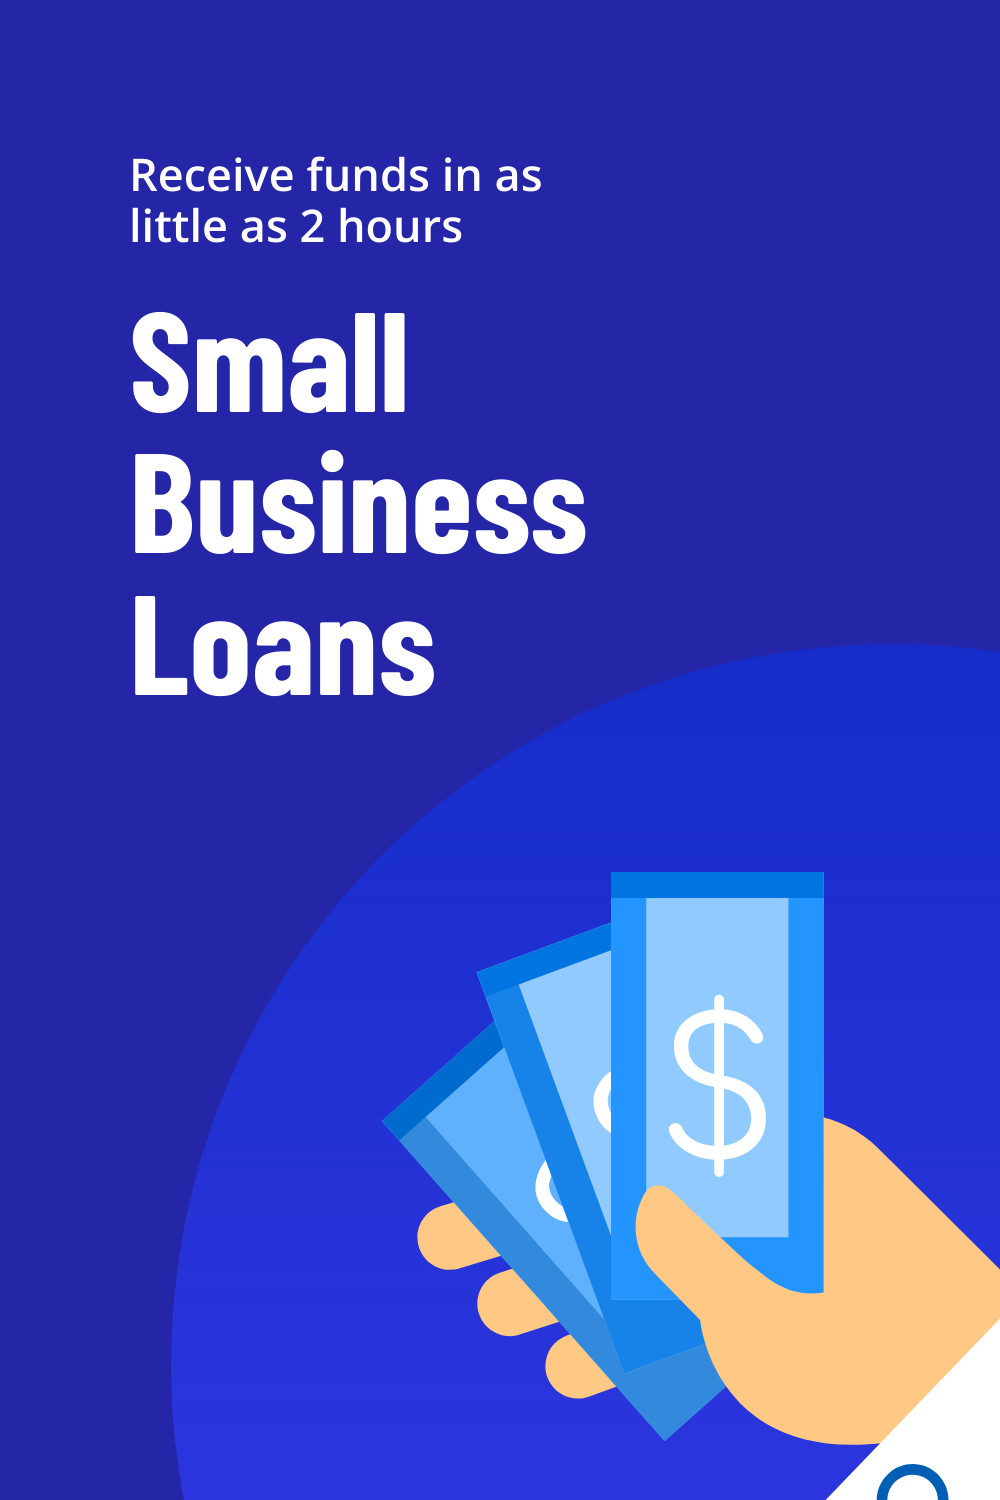 Quick Small Business Loans Inline Rectangle 300x250